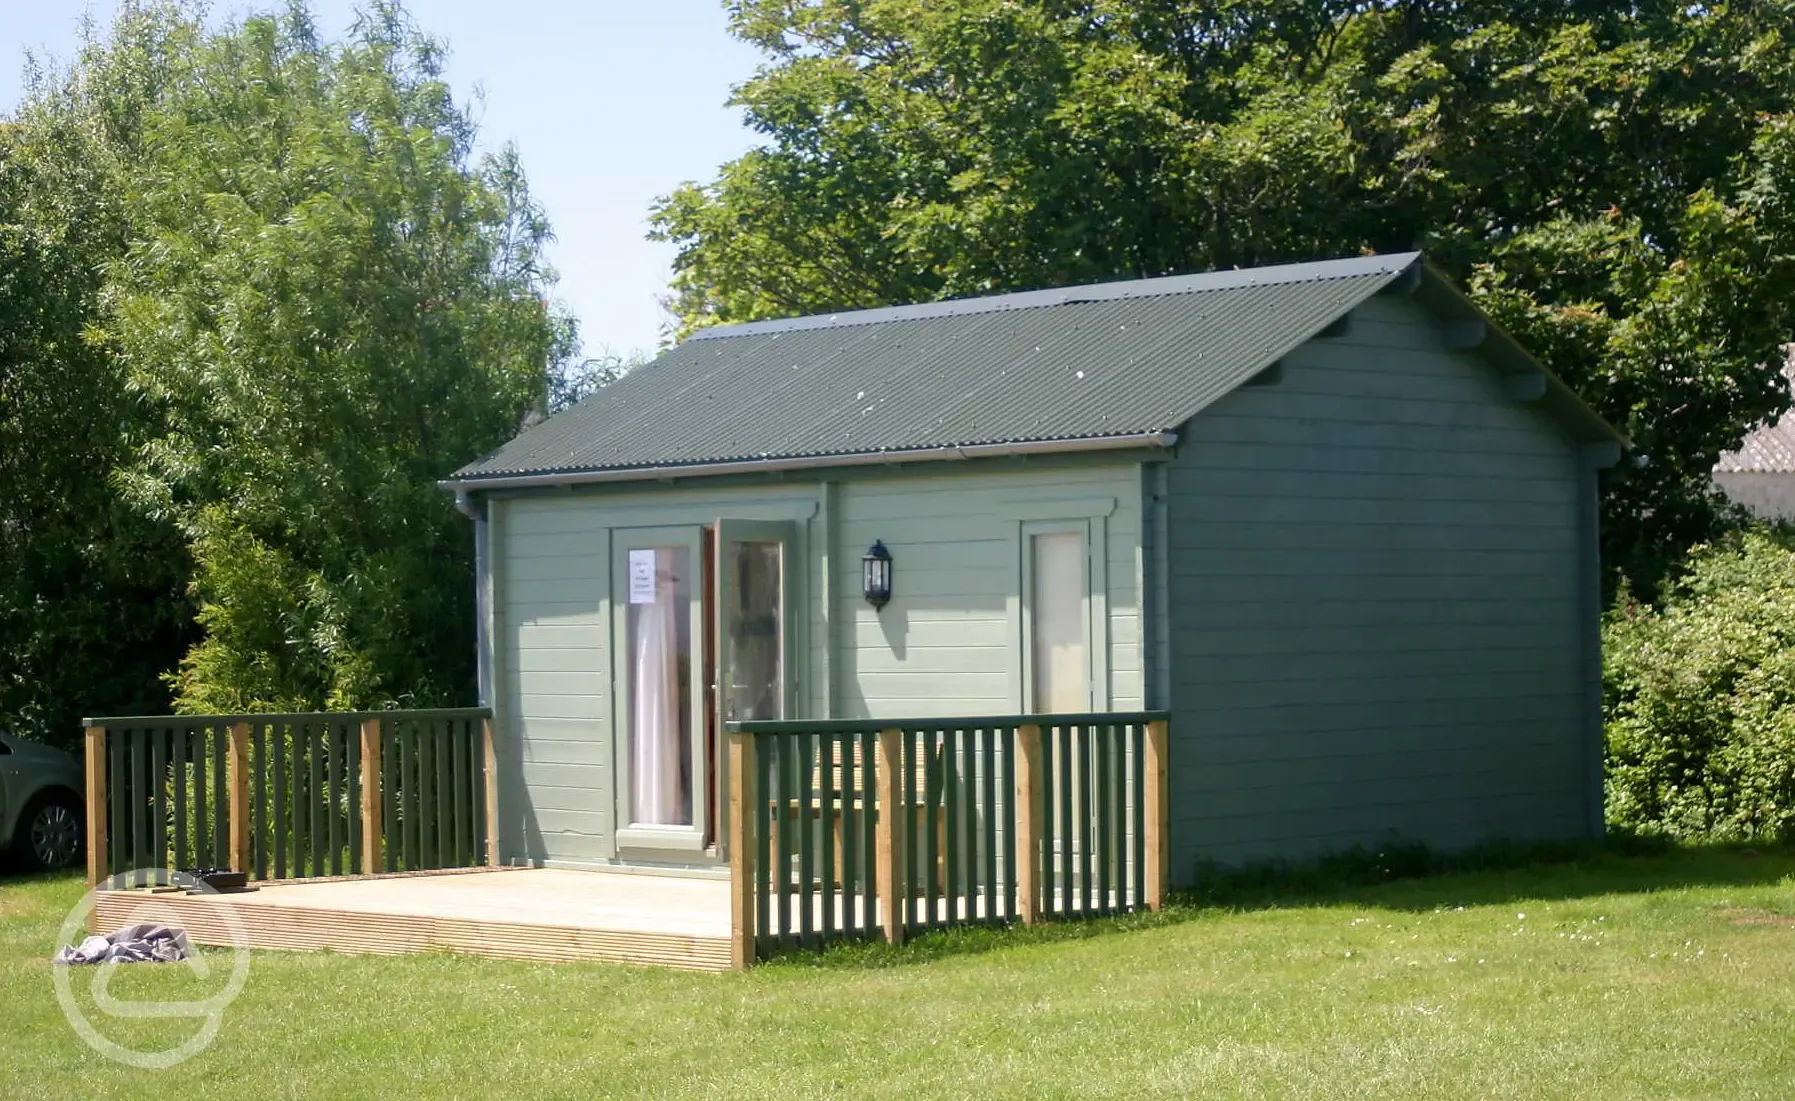 Glamping summerhouse at Glan-y-Mor Campsite